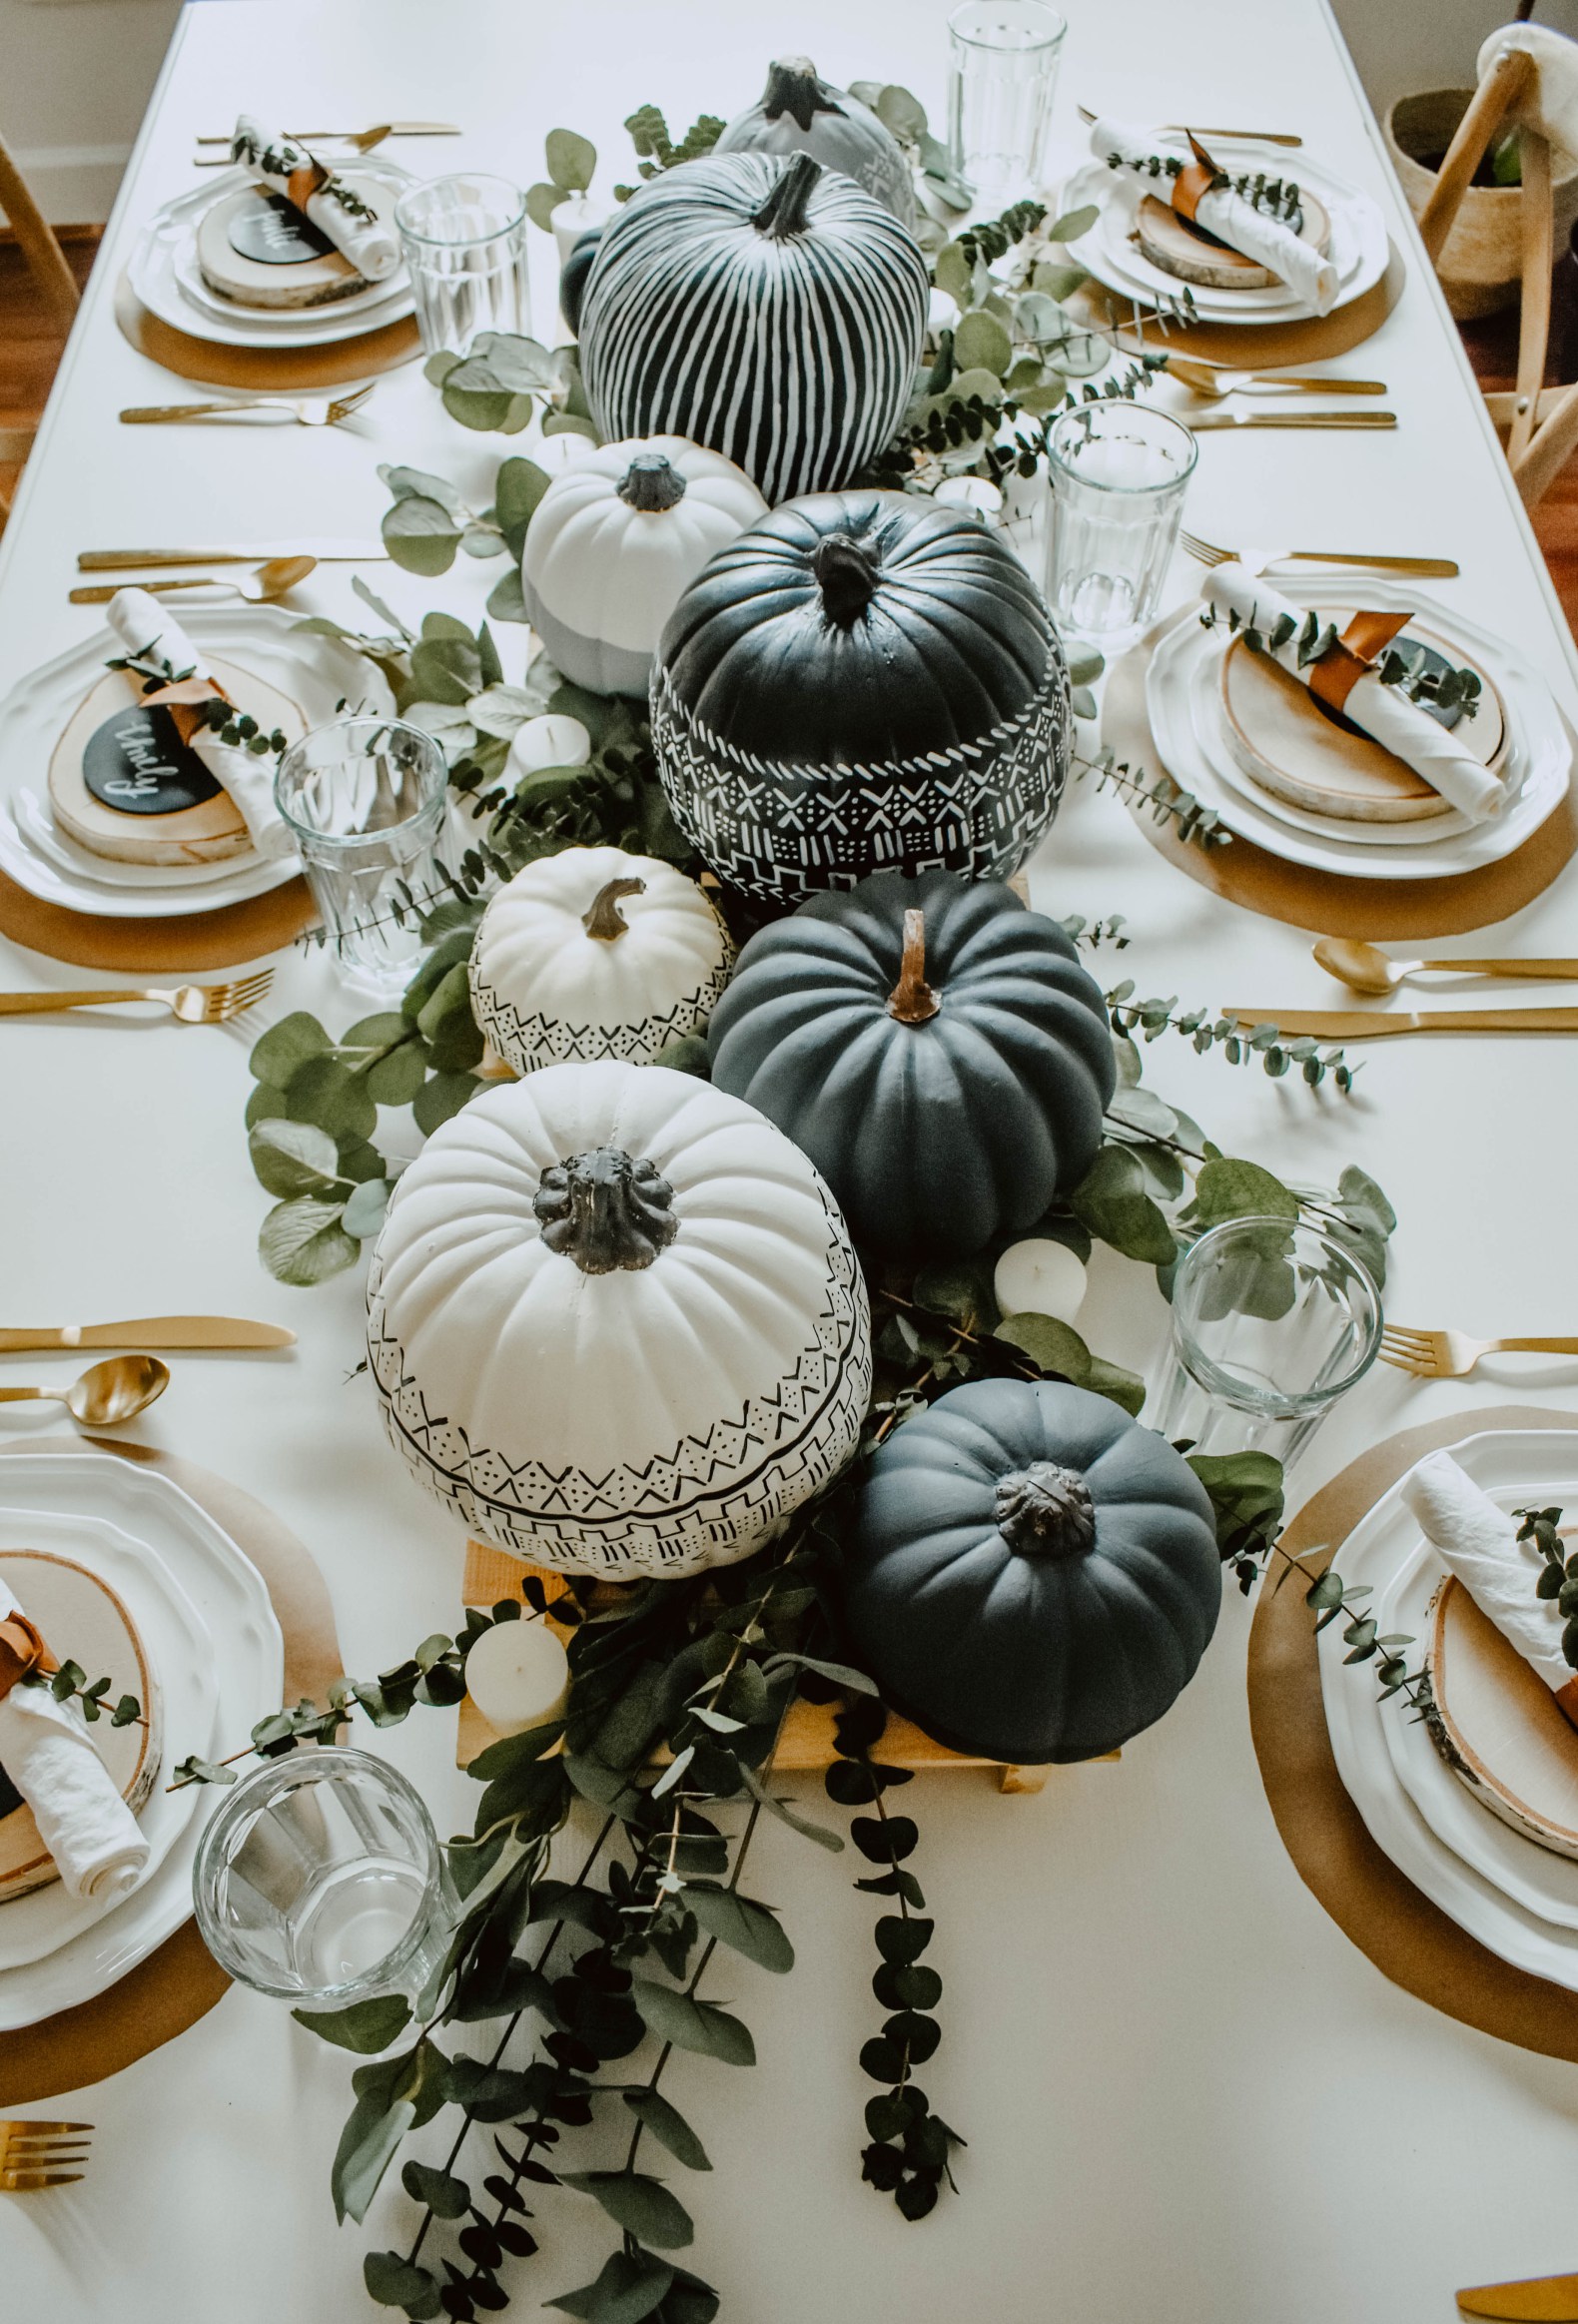 If your style is more boho modern, these DIY mud cloth painted pumpkins may be just what you need. Get creative by painting different patterns in a bold, consistent color scheme.